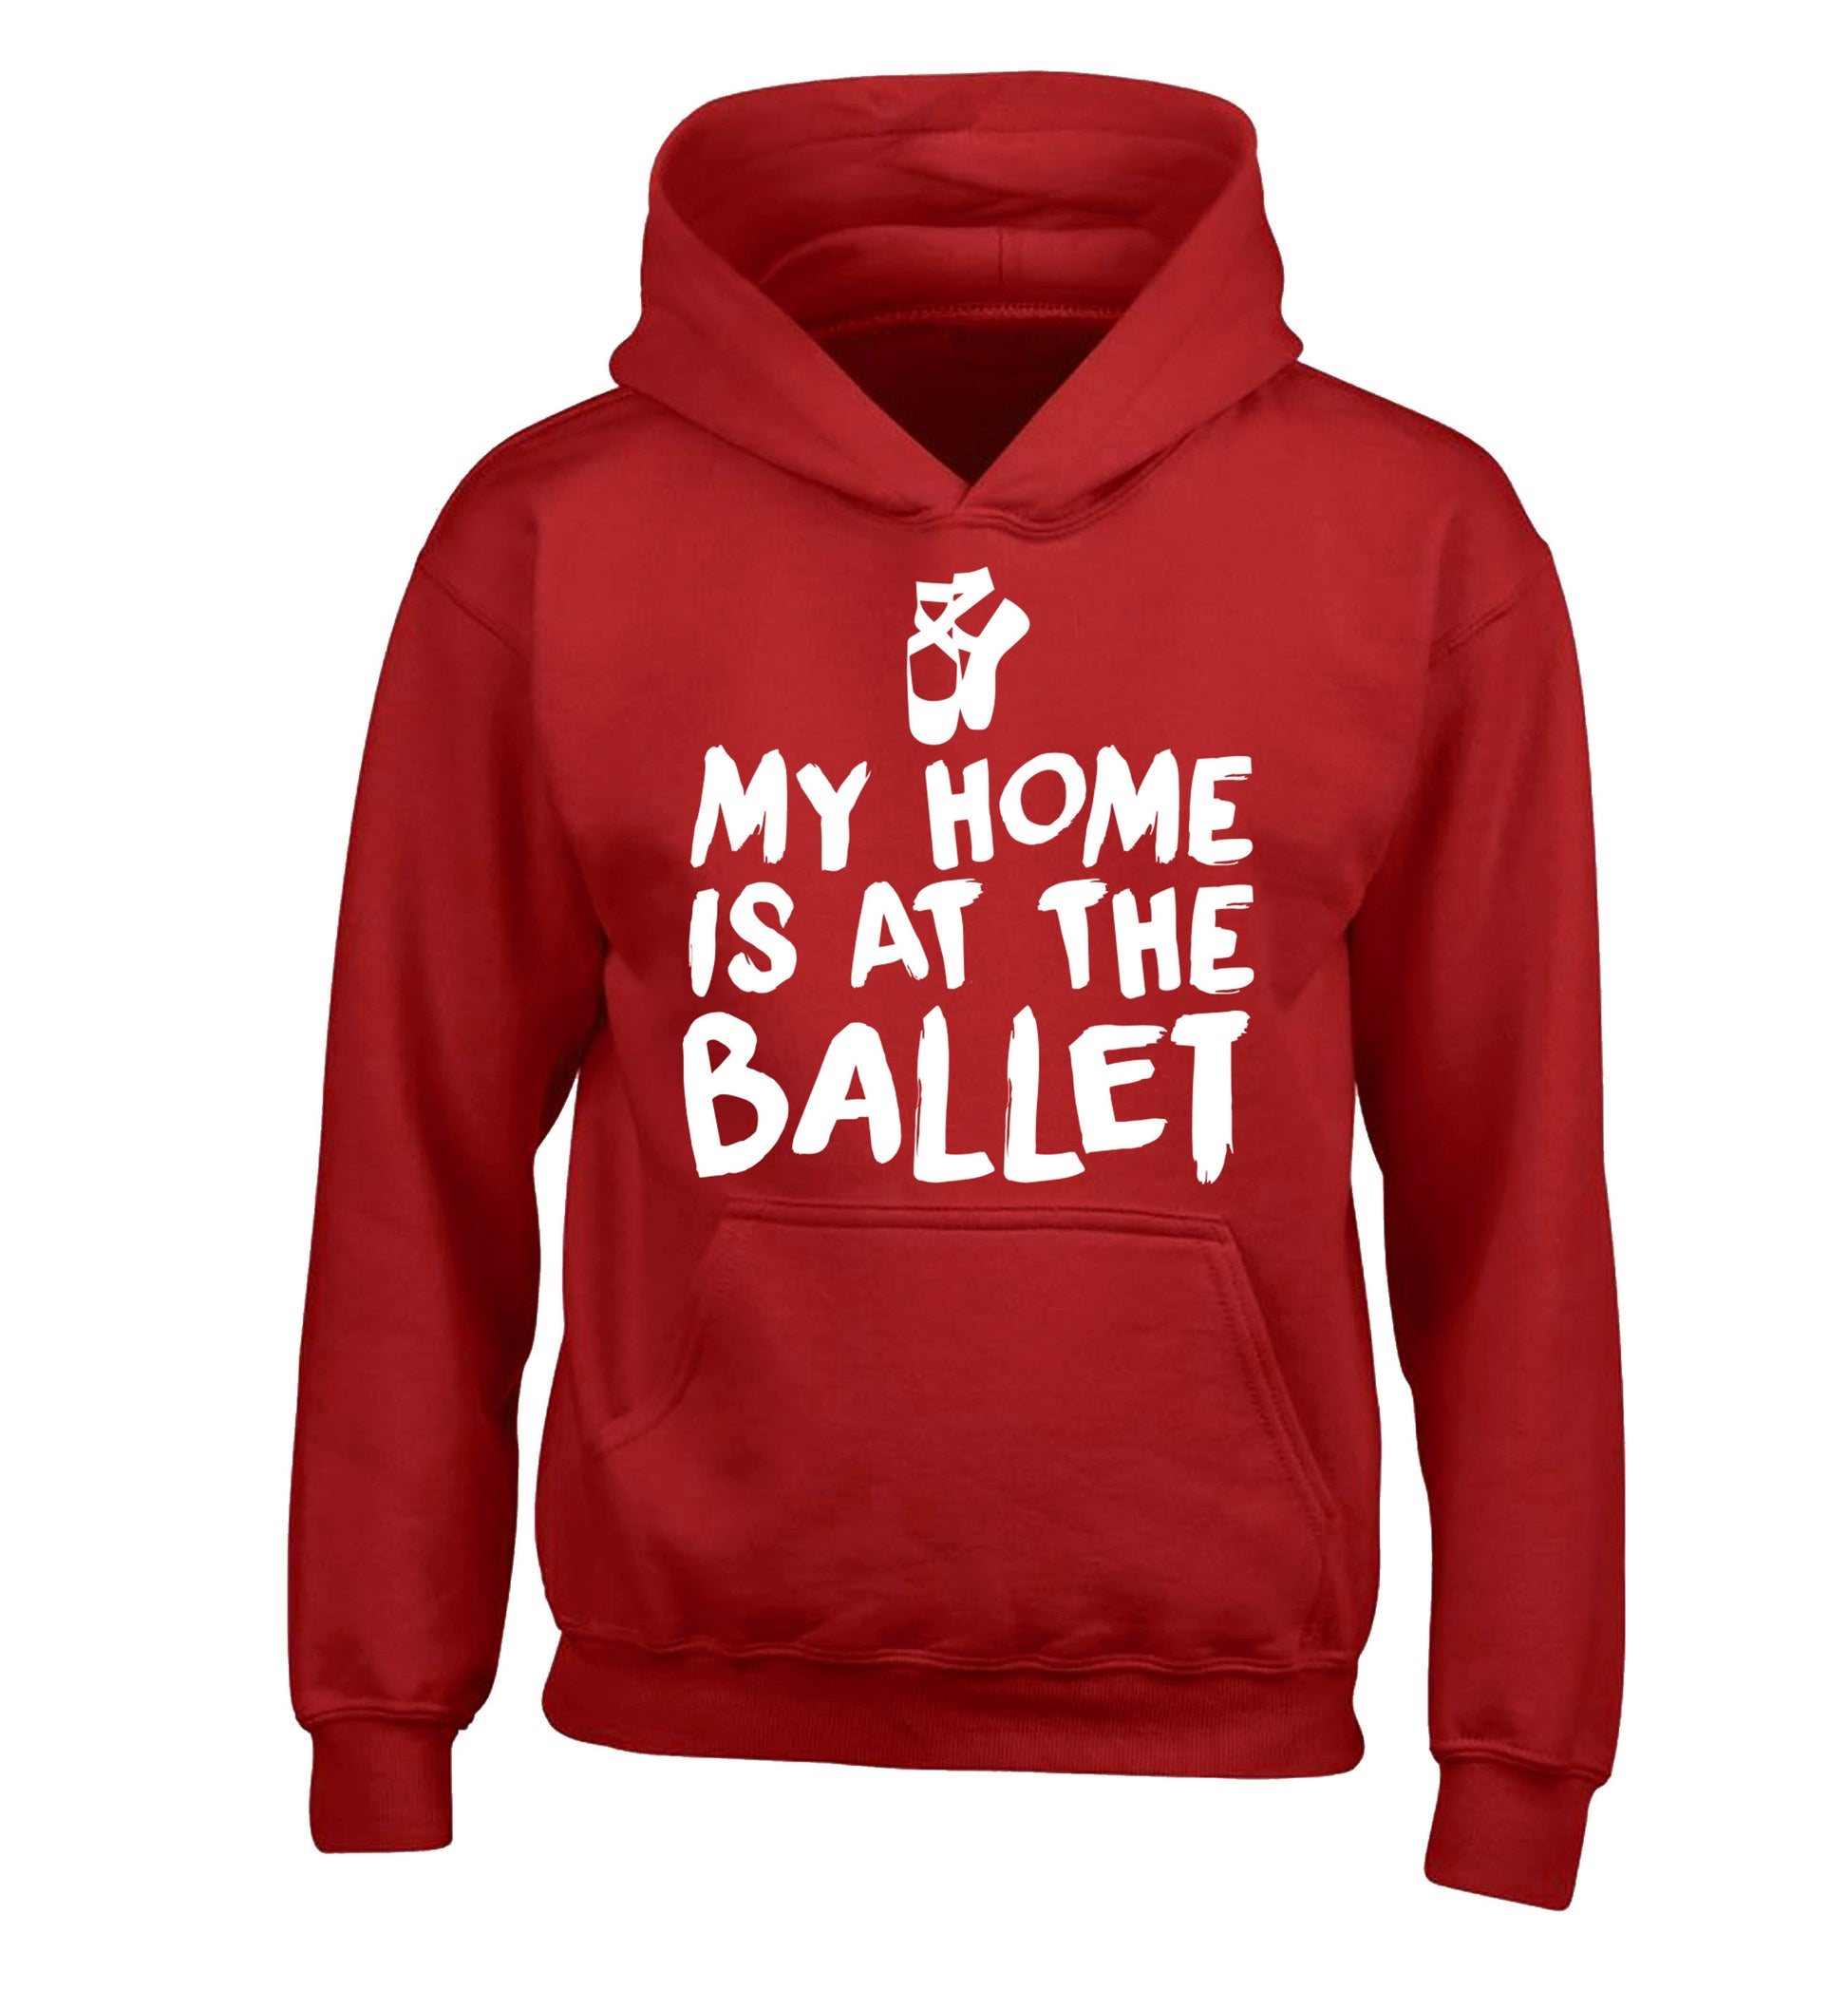 My home is at the dance studio children's red hoodie 12-14 Years